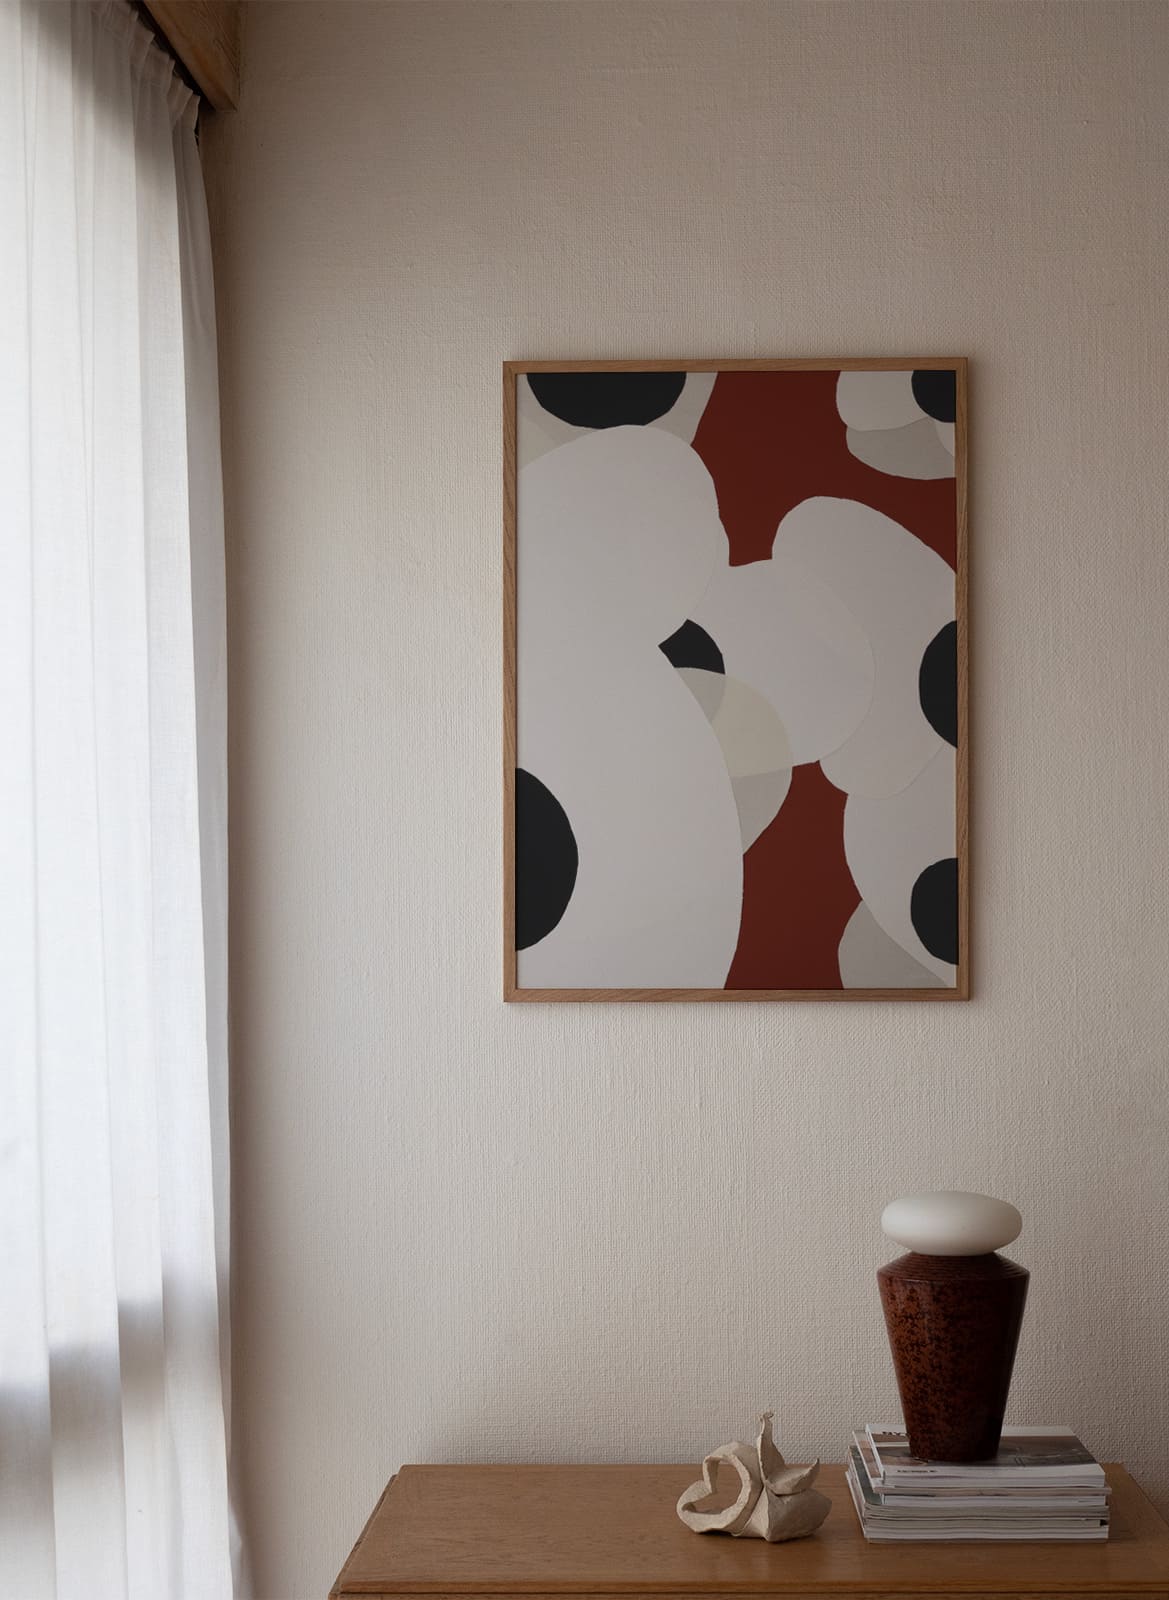 Framed colorful poster hanging in a living room by Atelier Cph